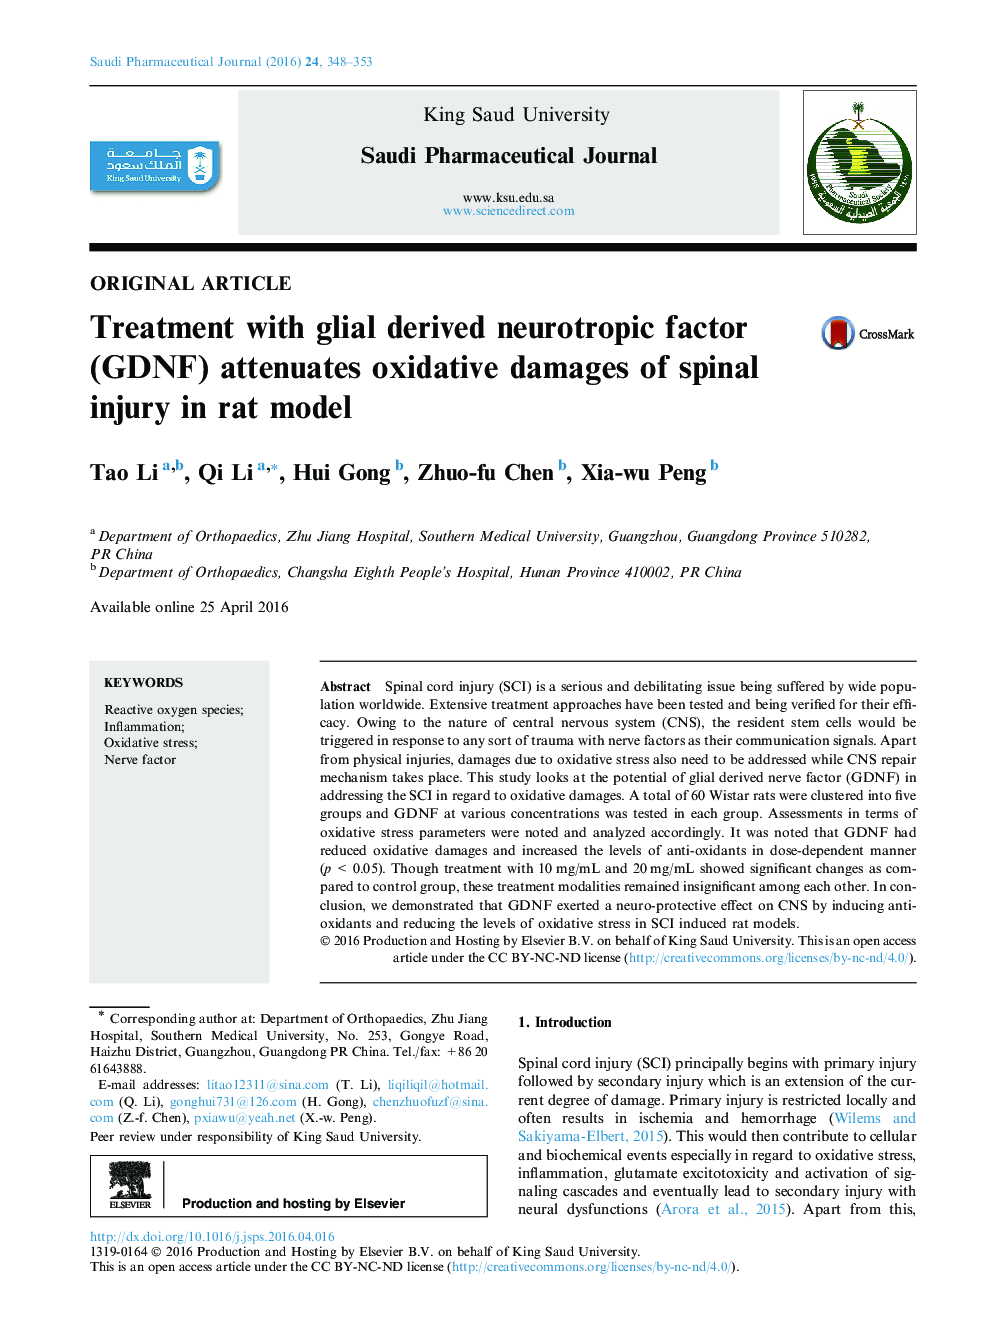 Treatment with glial derived neurotropic factor (GDNF) attenuates oxidative damages of spinal injury in rat model 